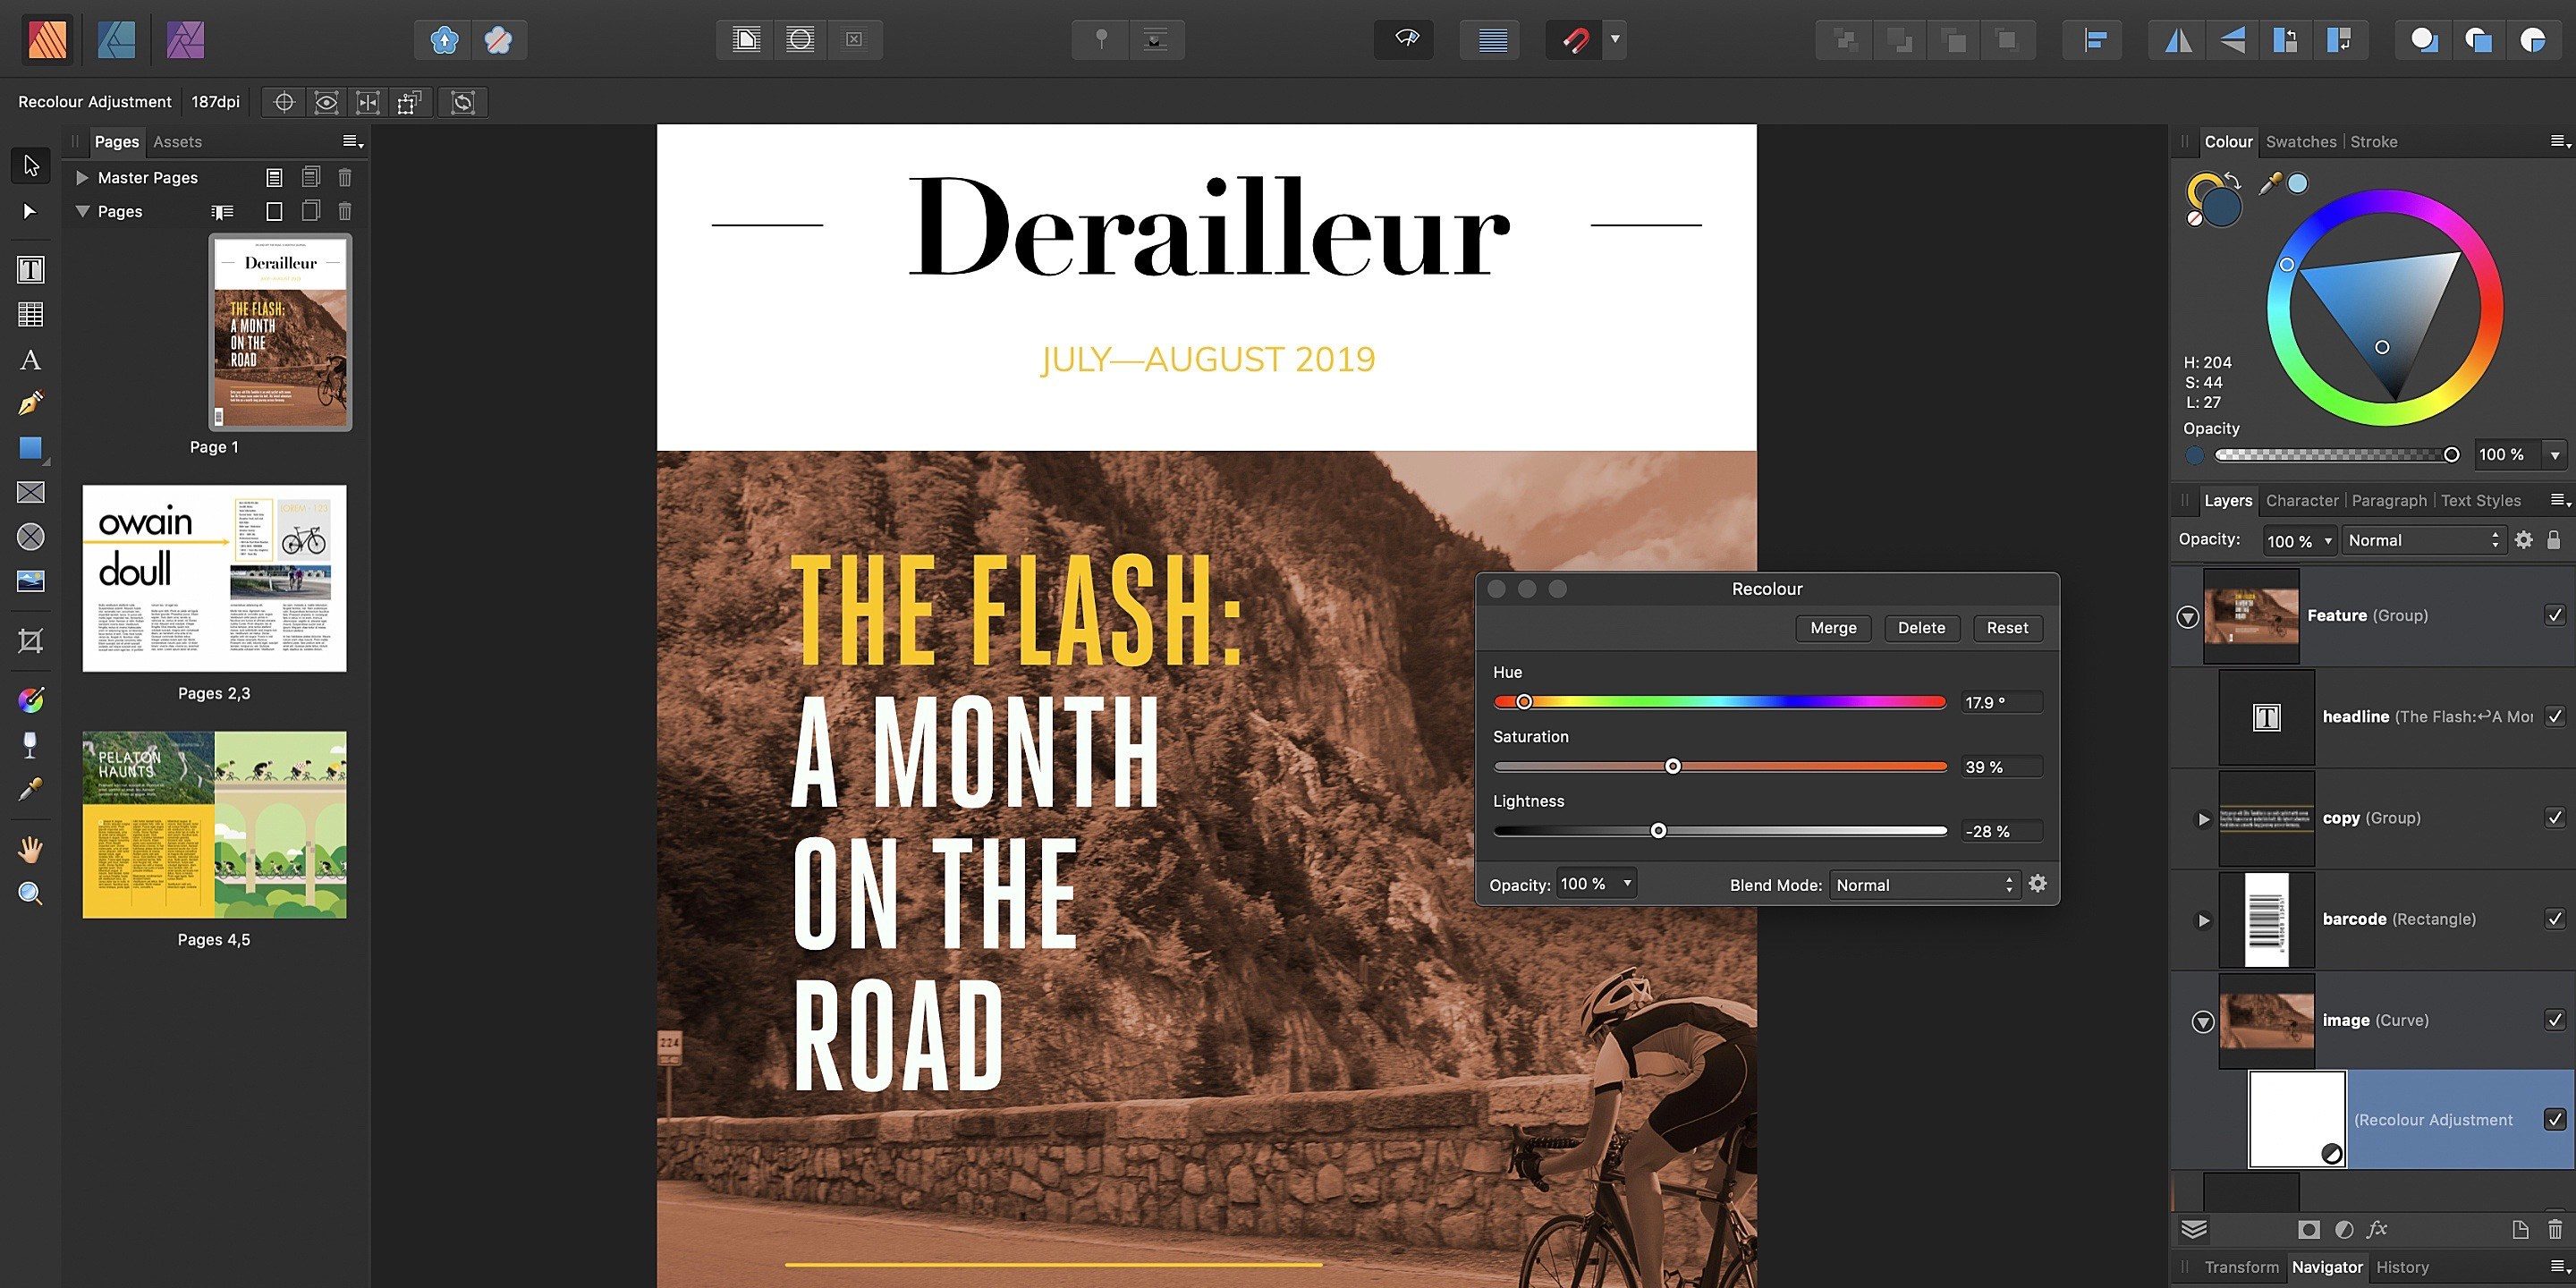 download the new version for ios Affinity Publisher